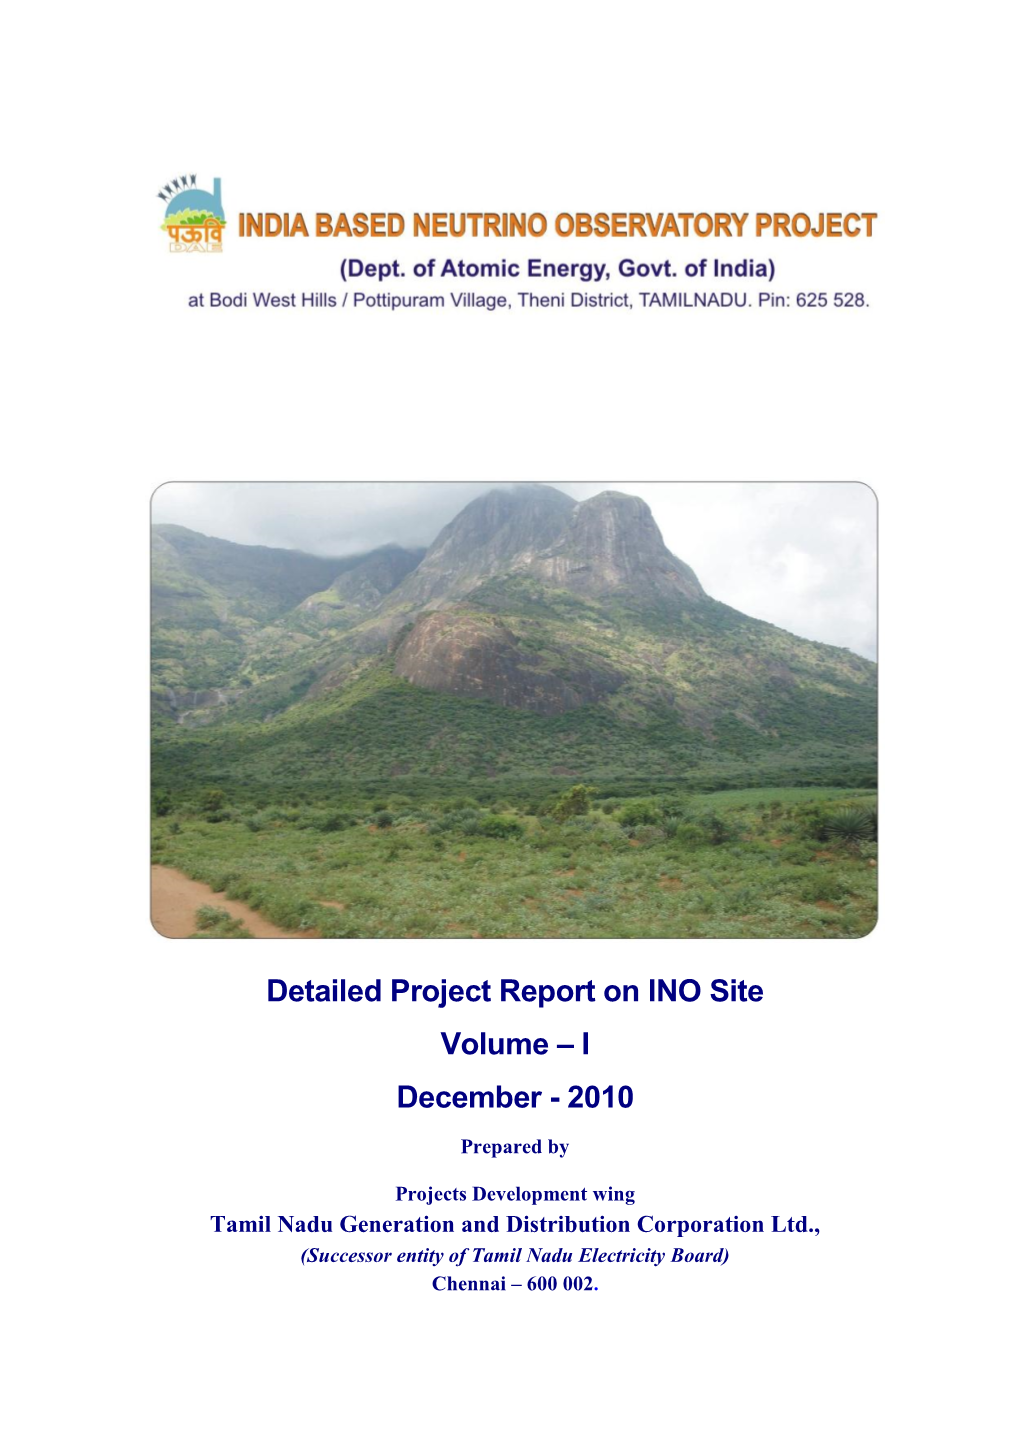 Detailed Project Report on INO Site Volume – I